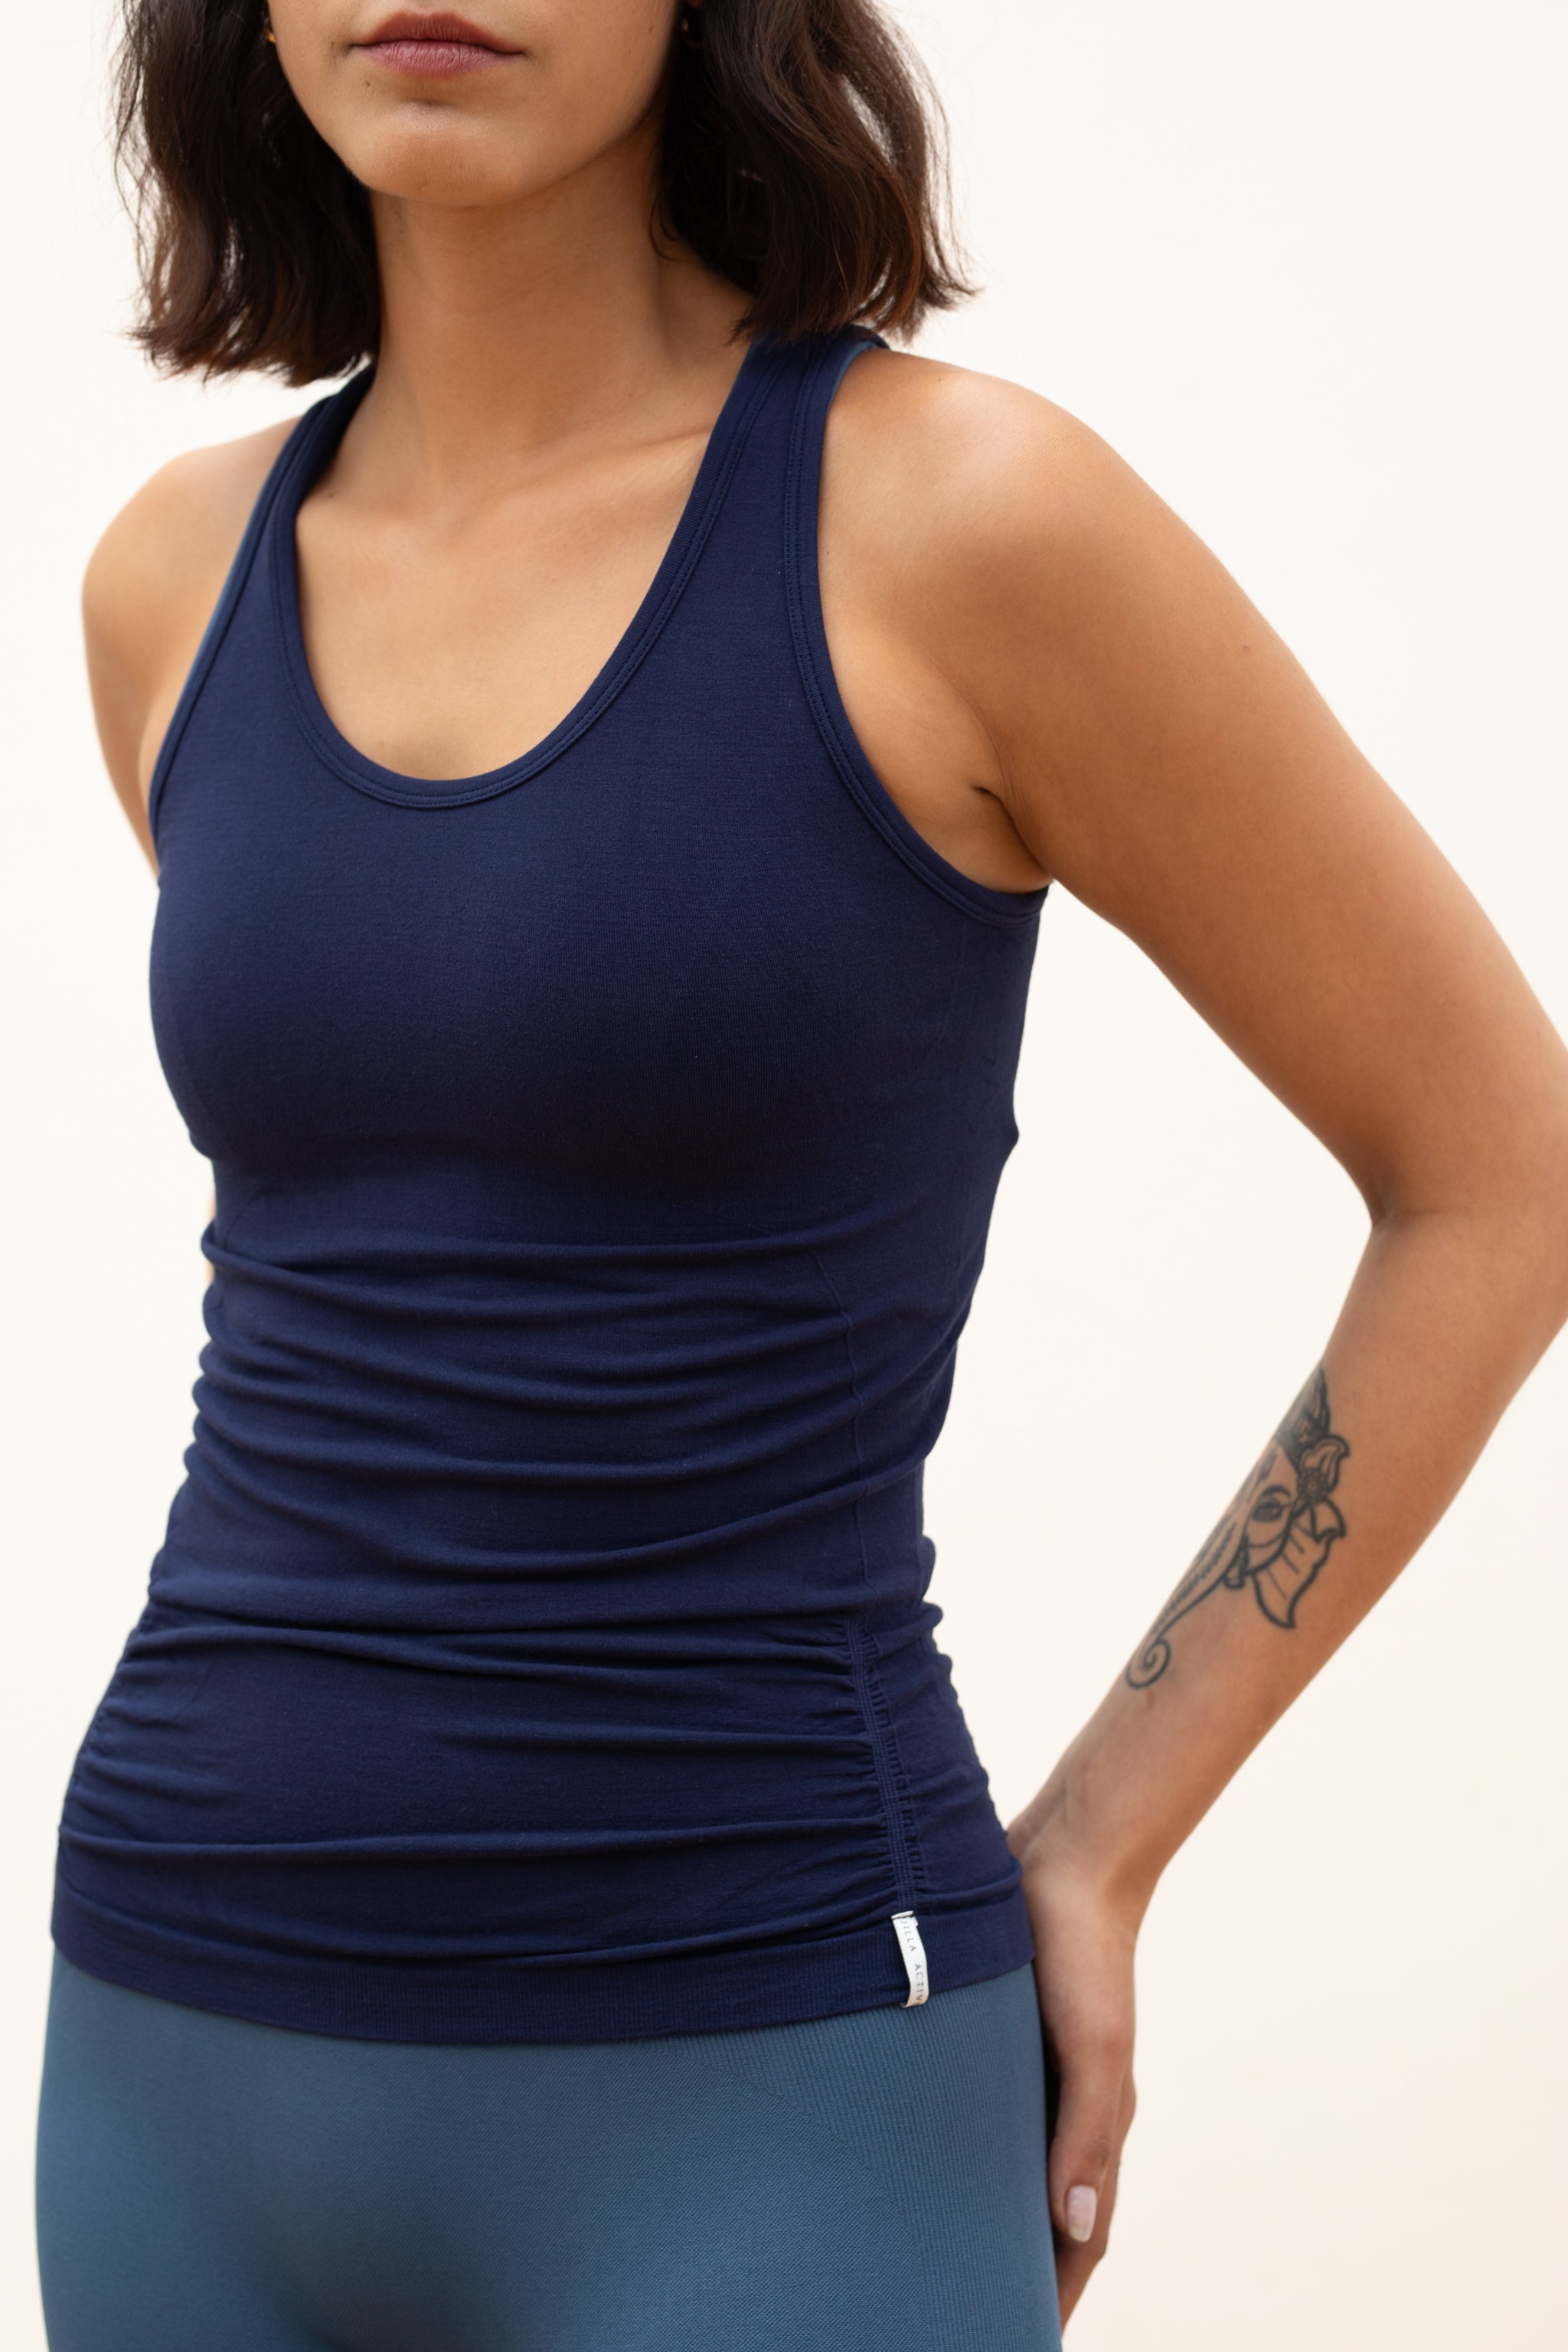 Model wearing navy blue tank top for sustainable activewear brand, Jilla